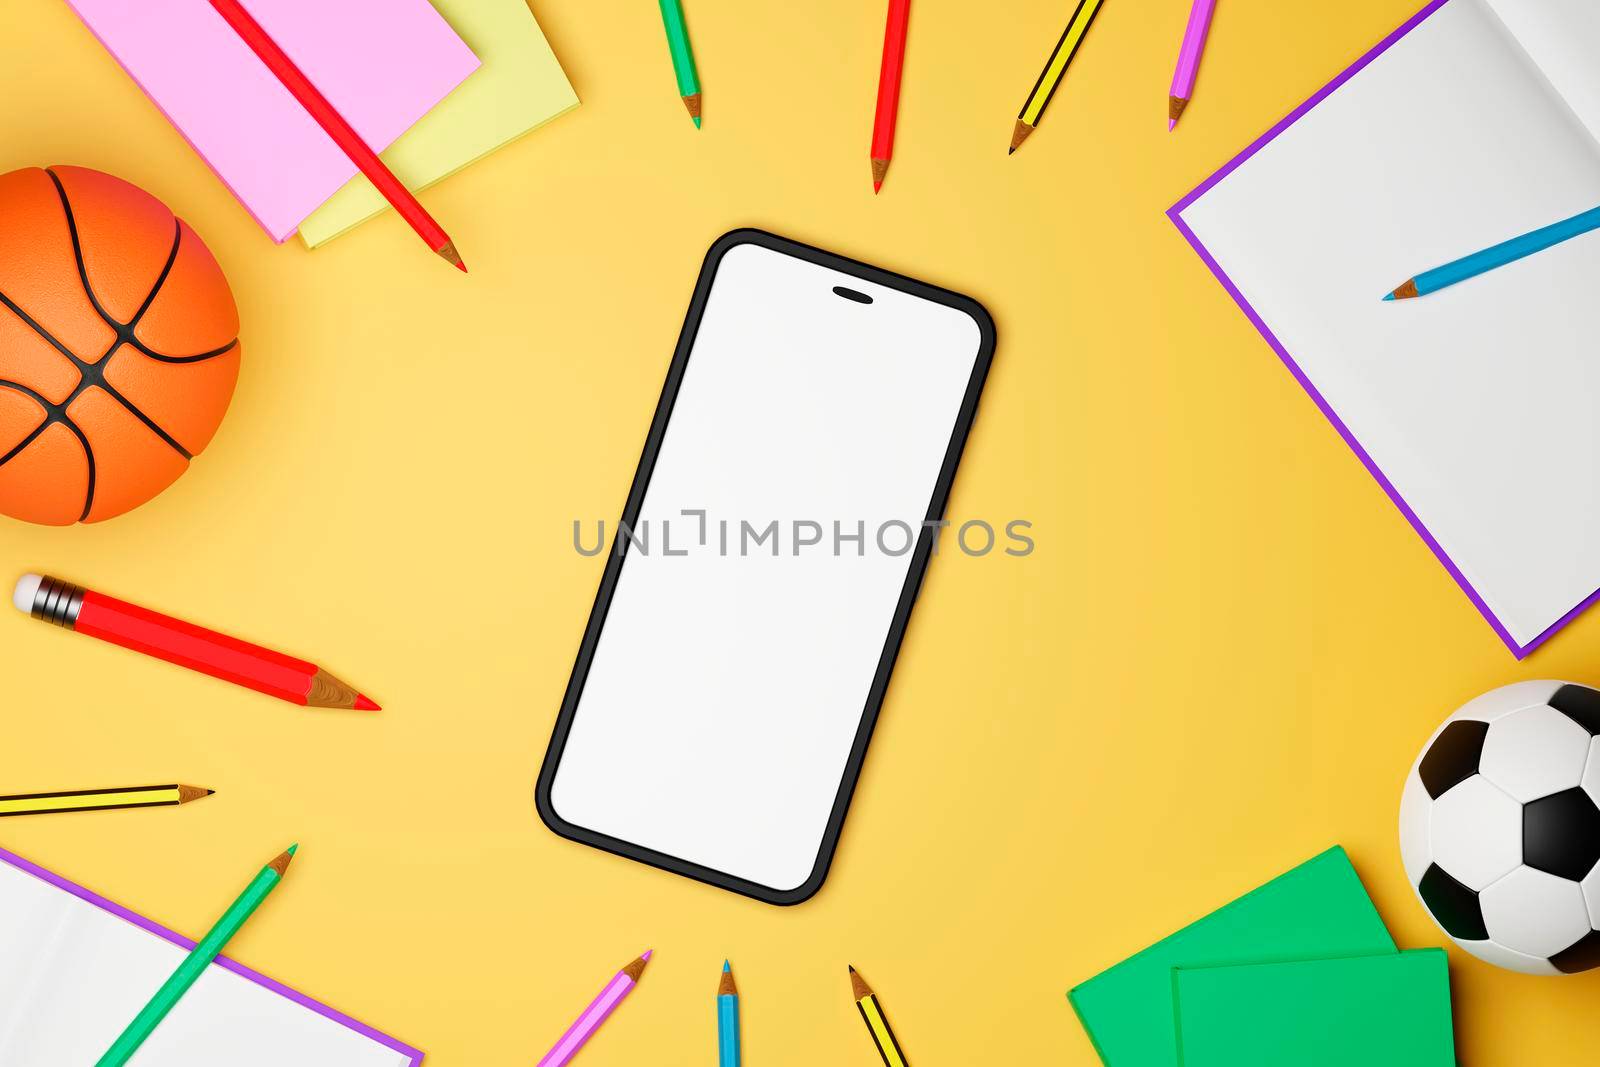 Top view of a set of school supplies and mobile phone on yellow background. 3d illustration